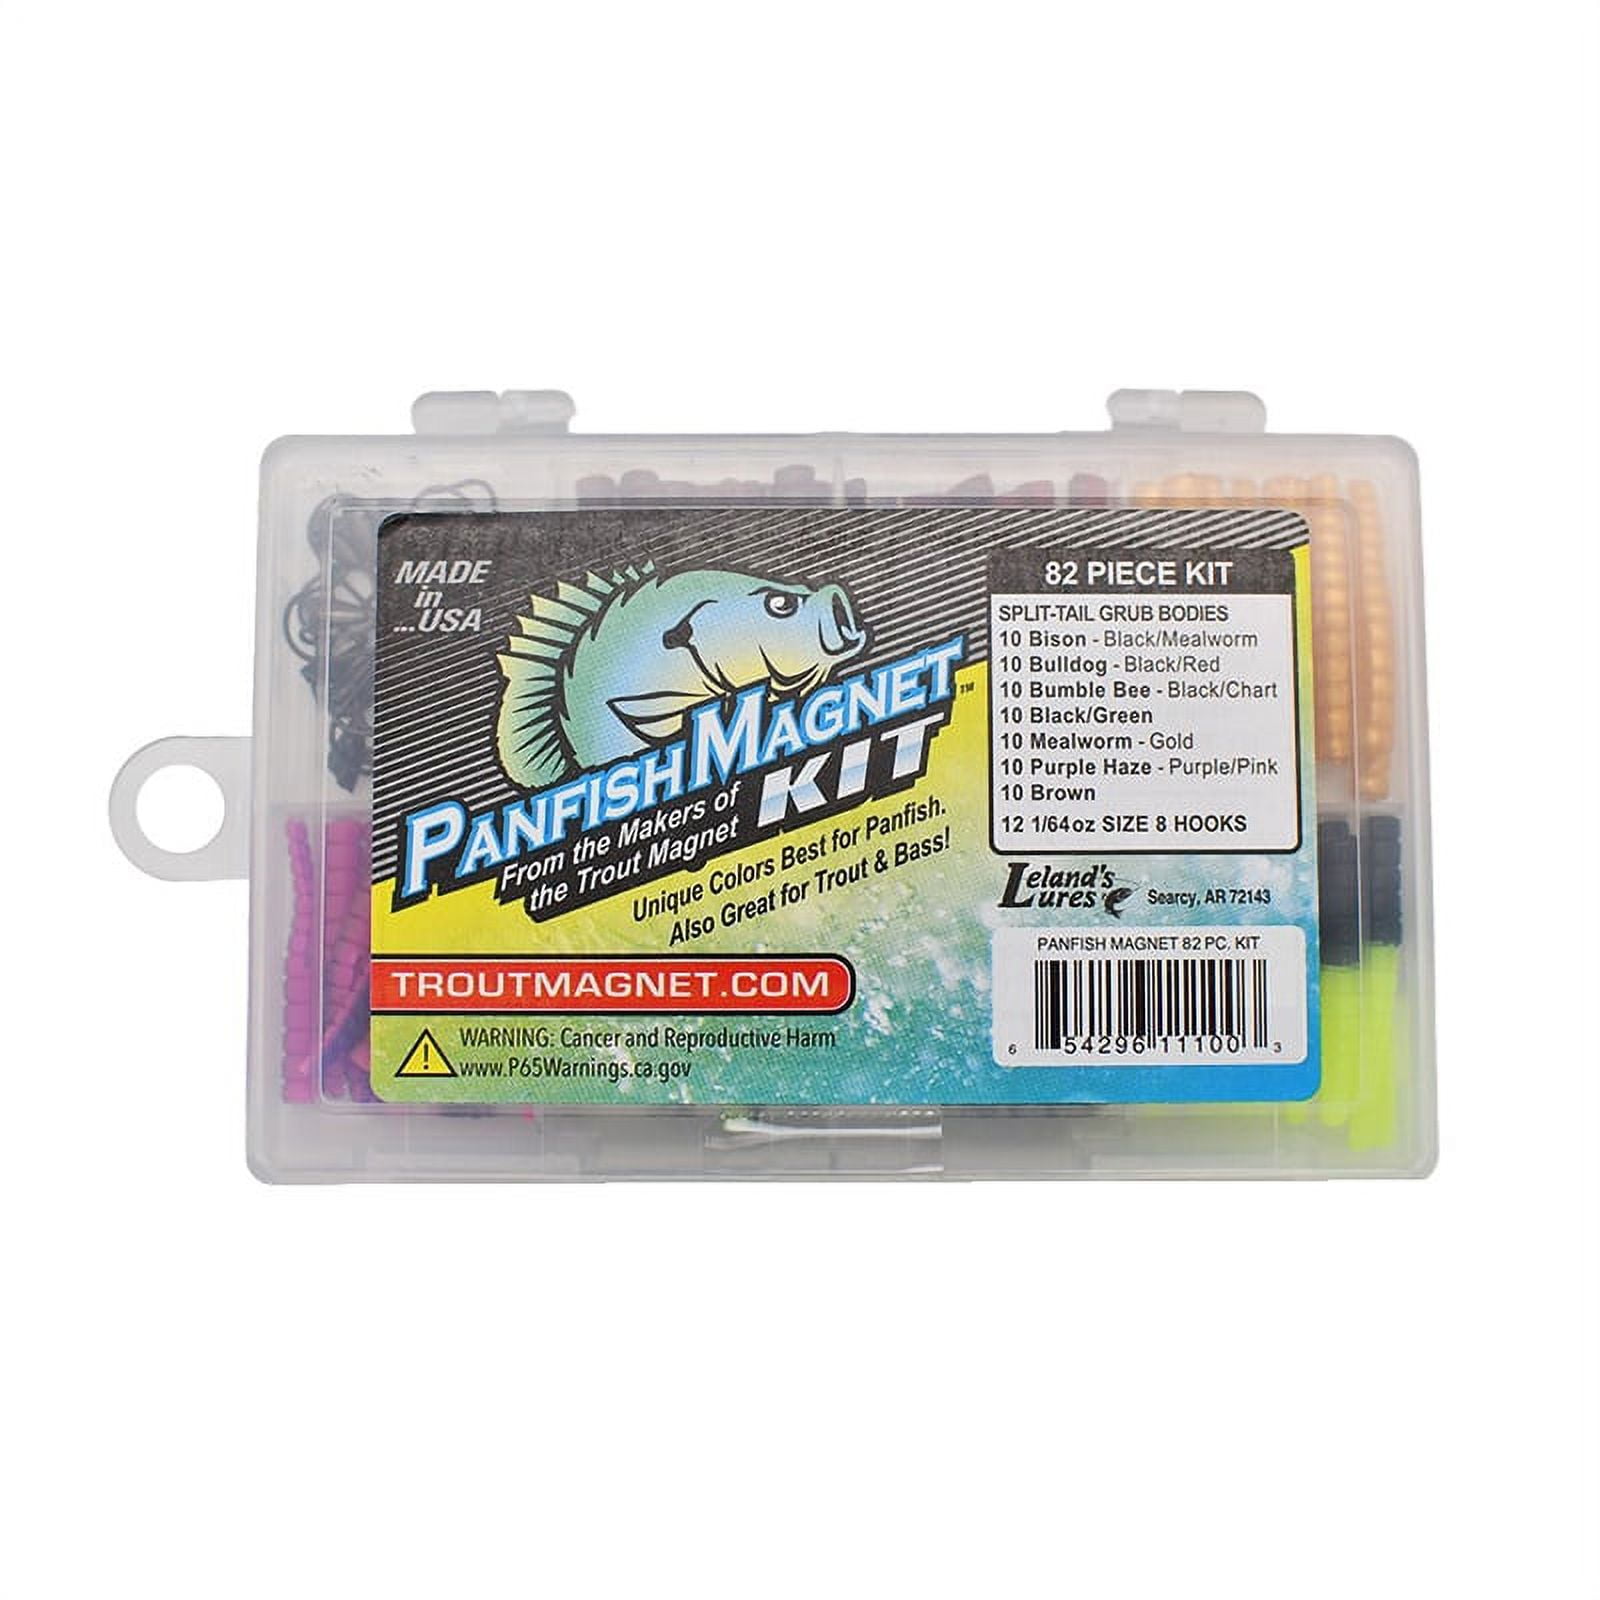 Trout Magnet Panfish Magnet Fishing Lures Kit, Assorted Colors, 1